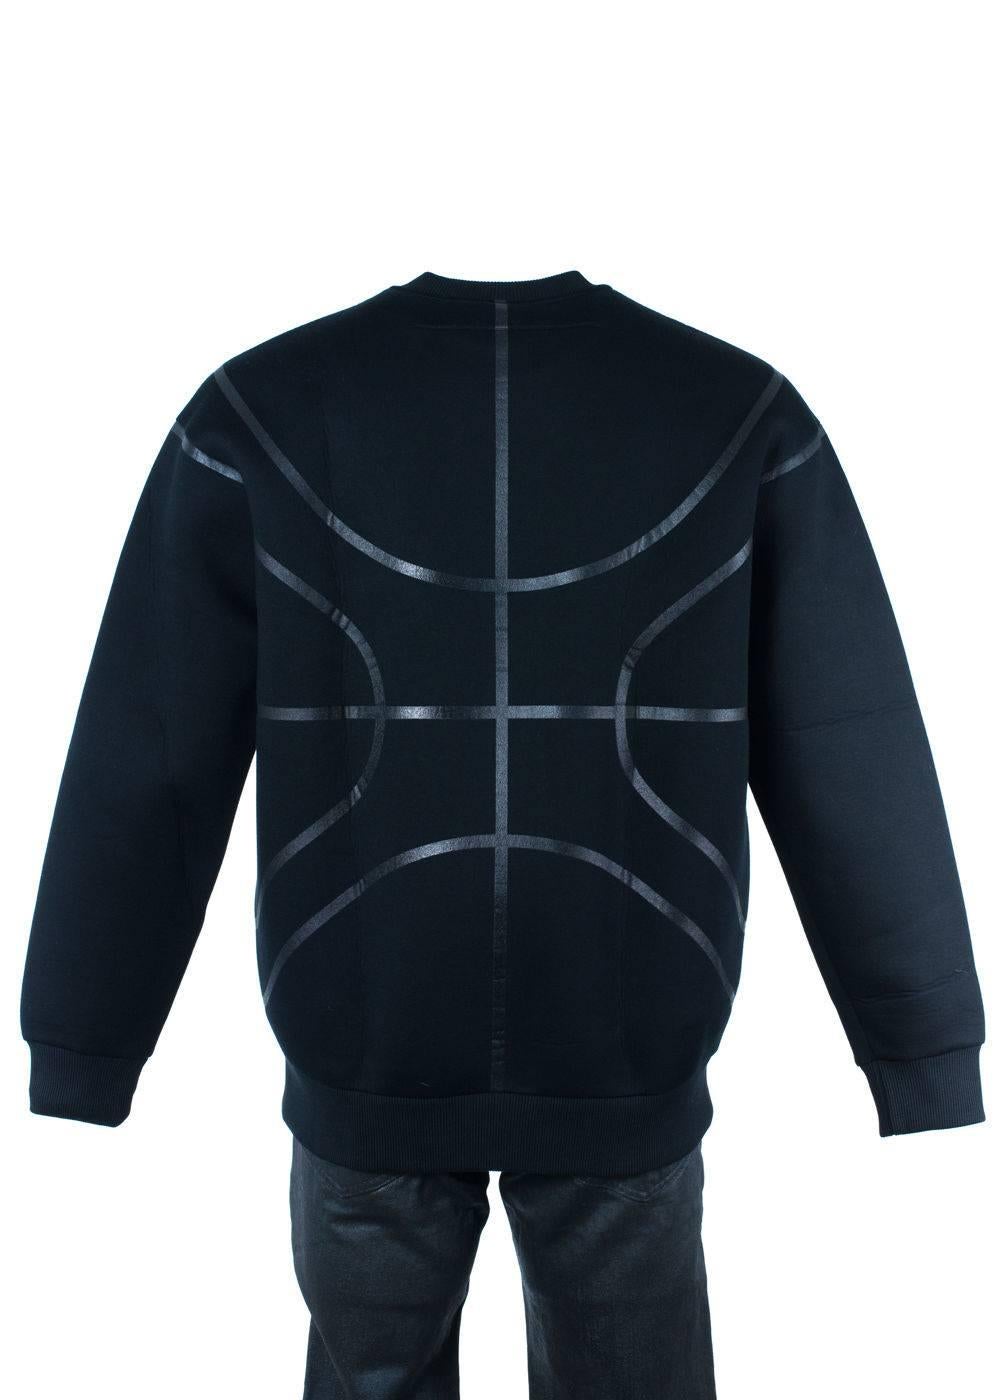 Givenchy Men's Black Viscose Basketball Sweater In New Condition For Sale In Brooklyn, NY